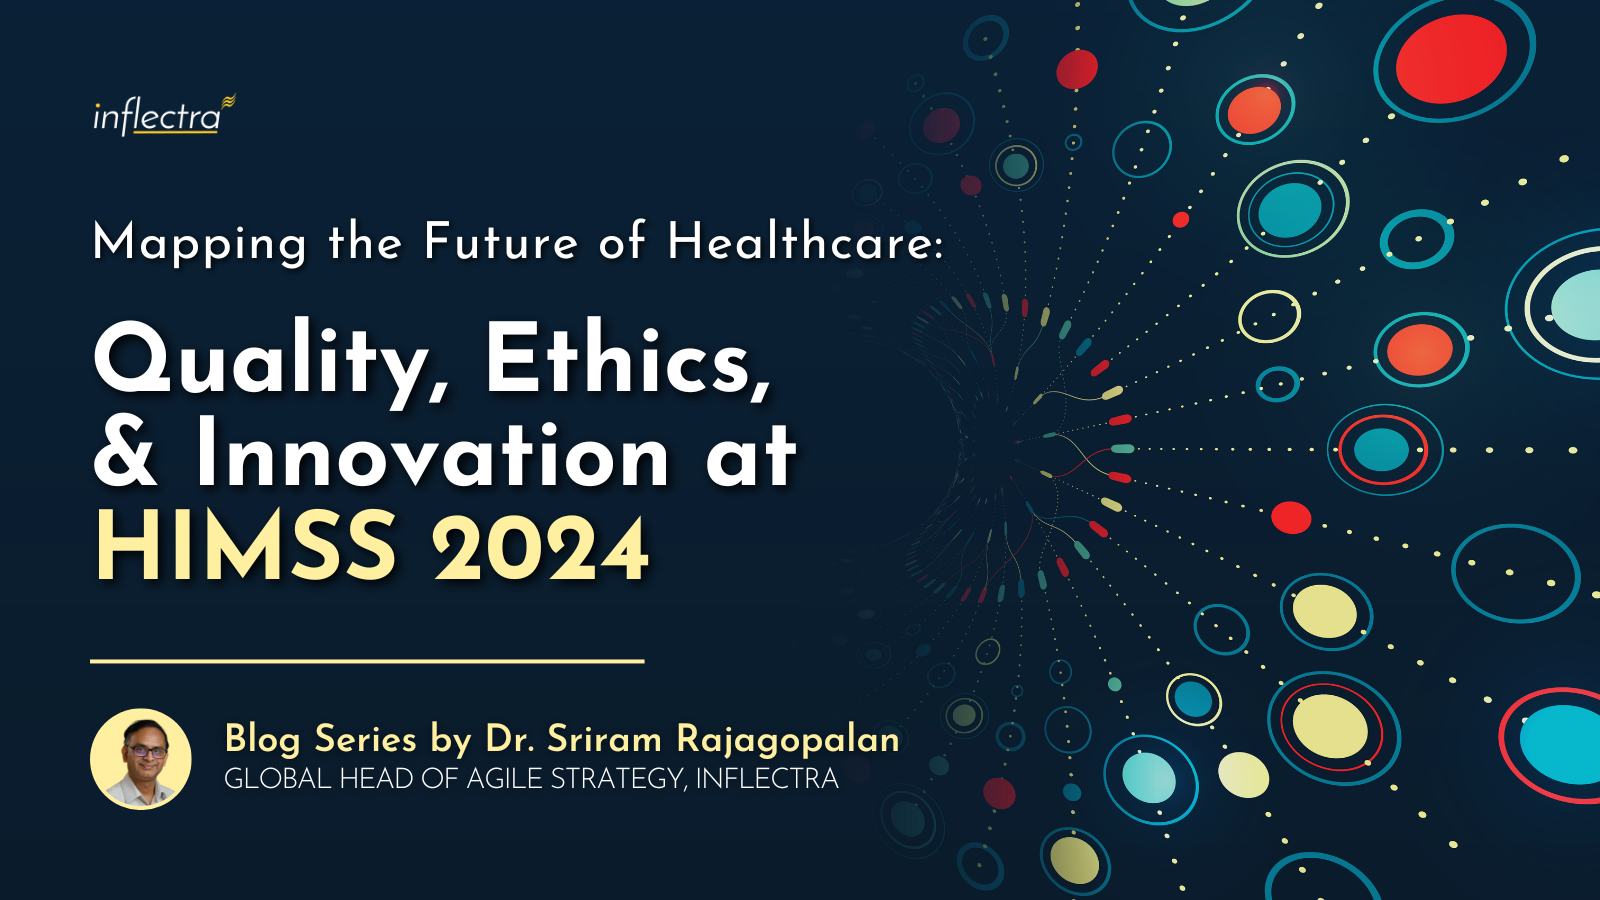 Mapping the Future of Healthcare: Quality, Ethics, and Innovation at HMSS 2024. A blog series by Dr. Sriram Rajagopalan, Global Head of Agile Strategy at Inflectra